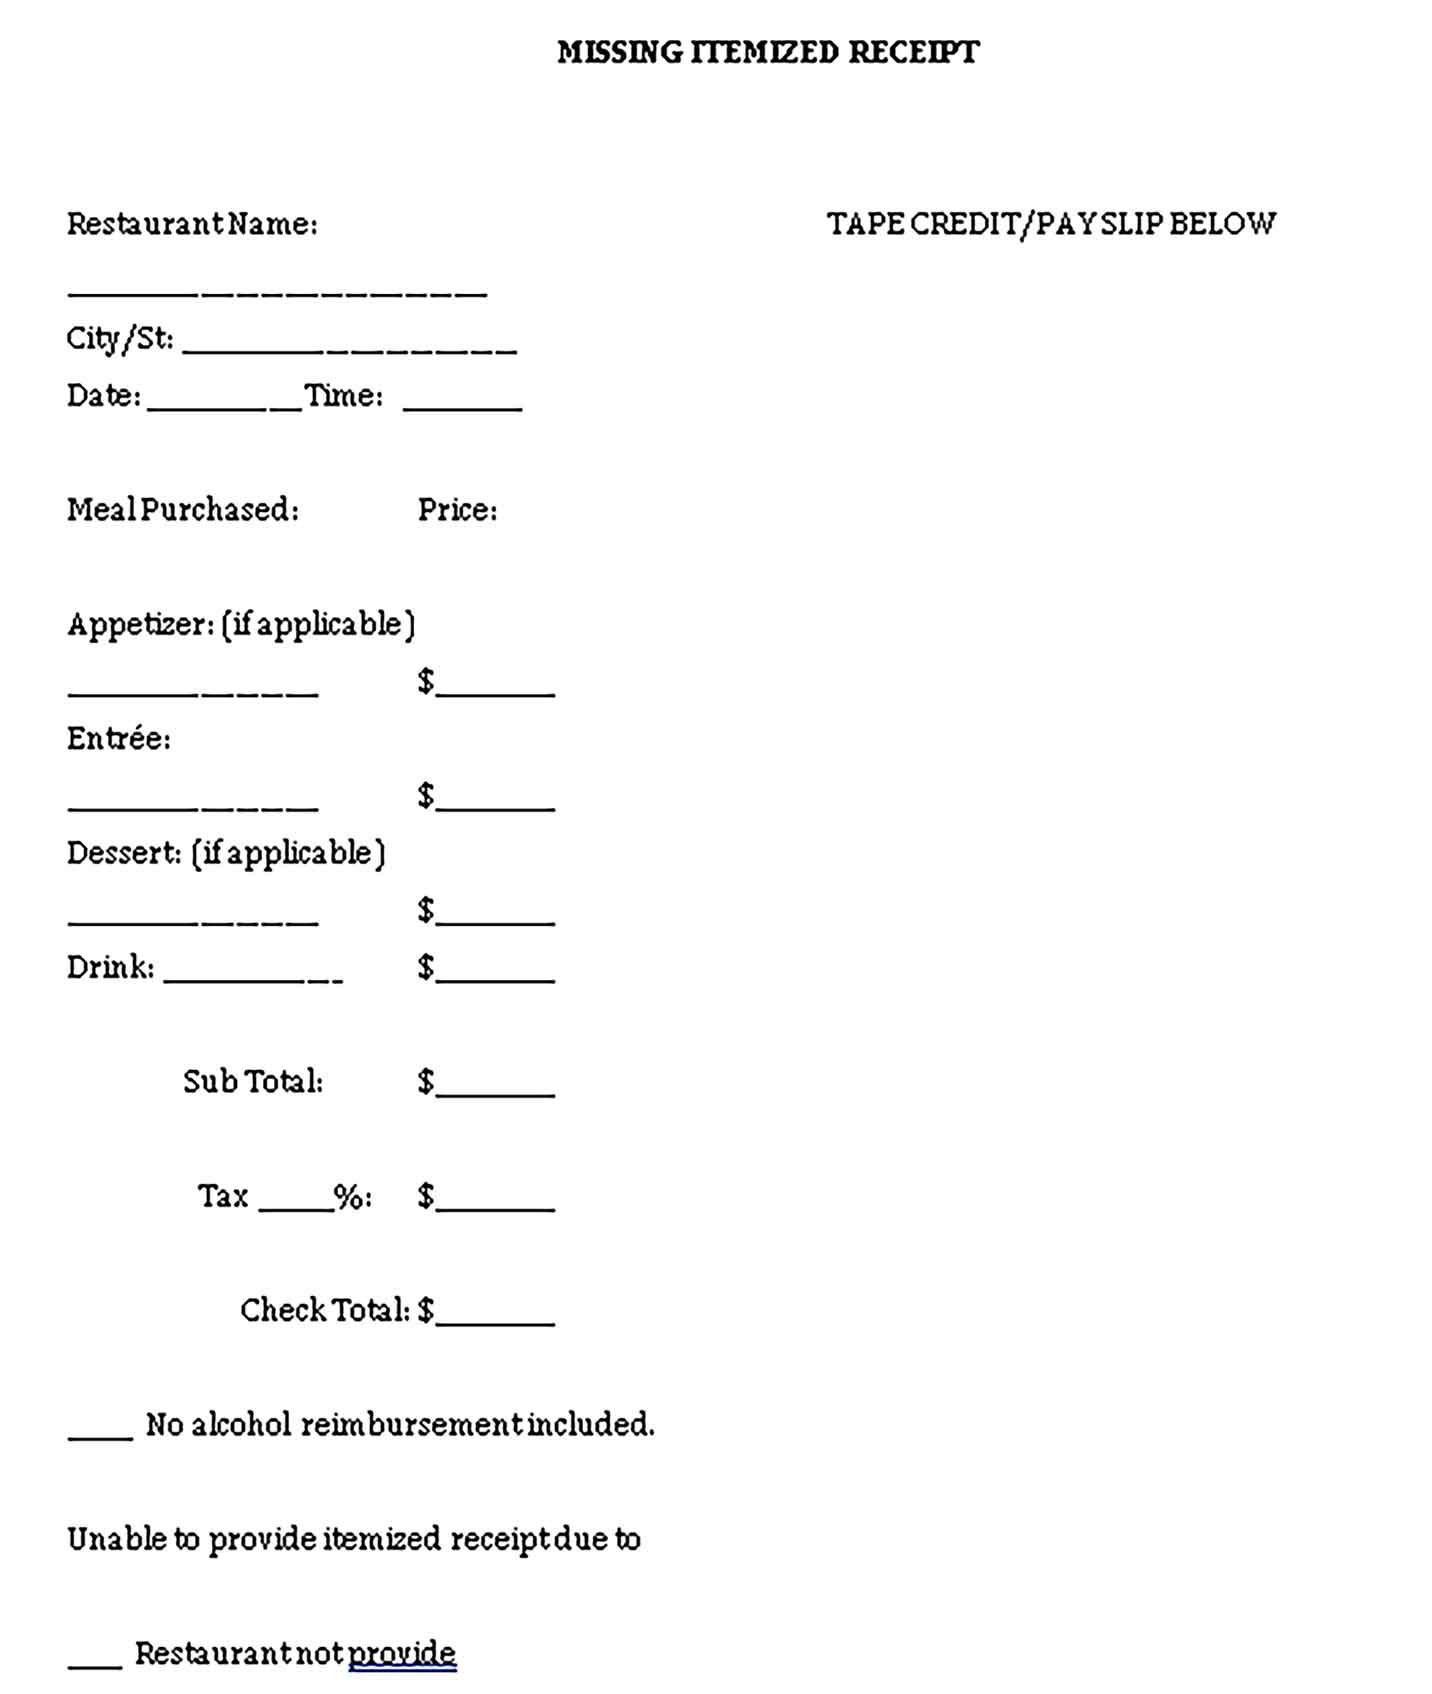 Sample Missing Itemized Receipt Word Templates